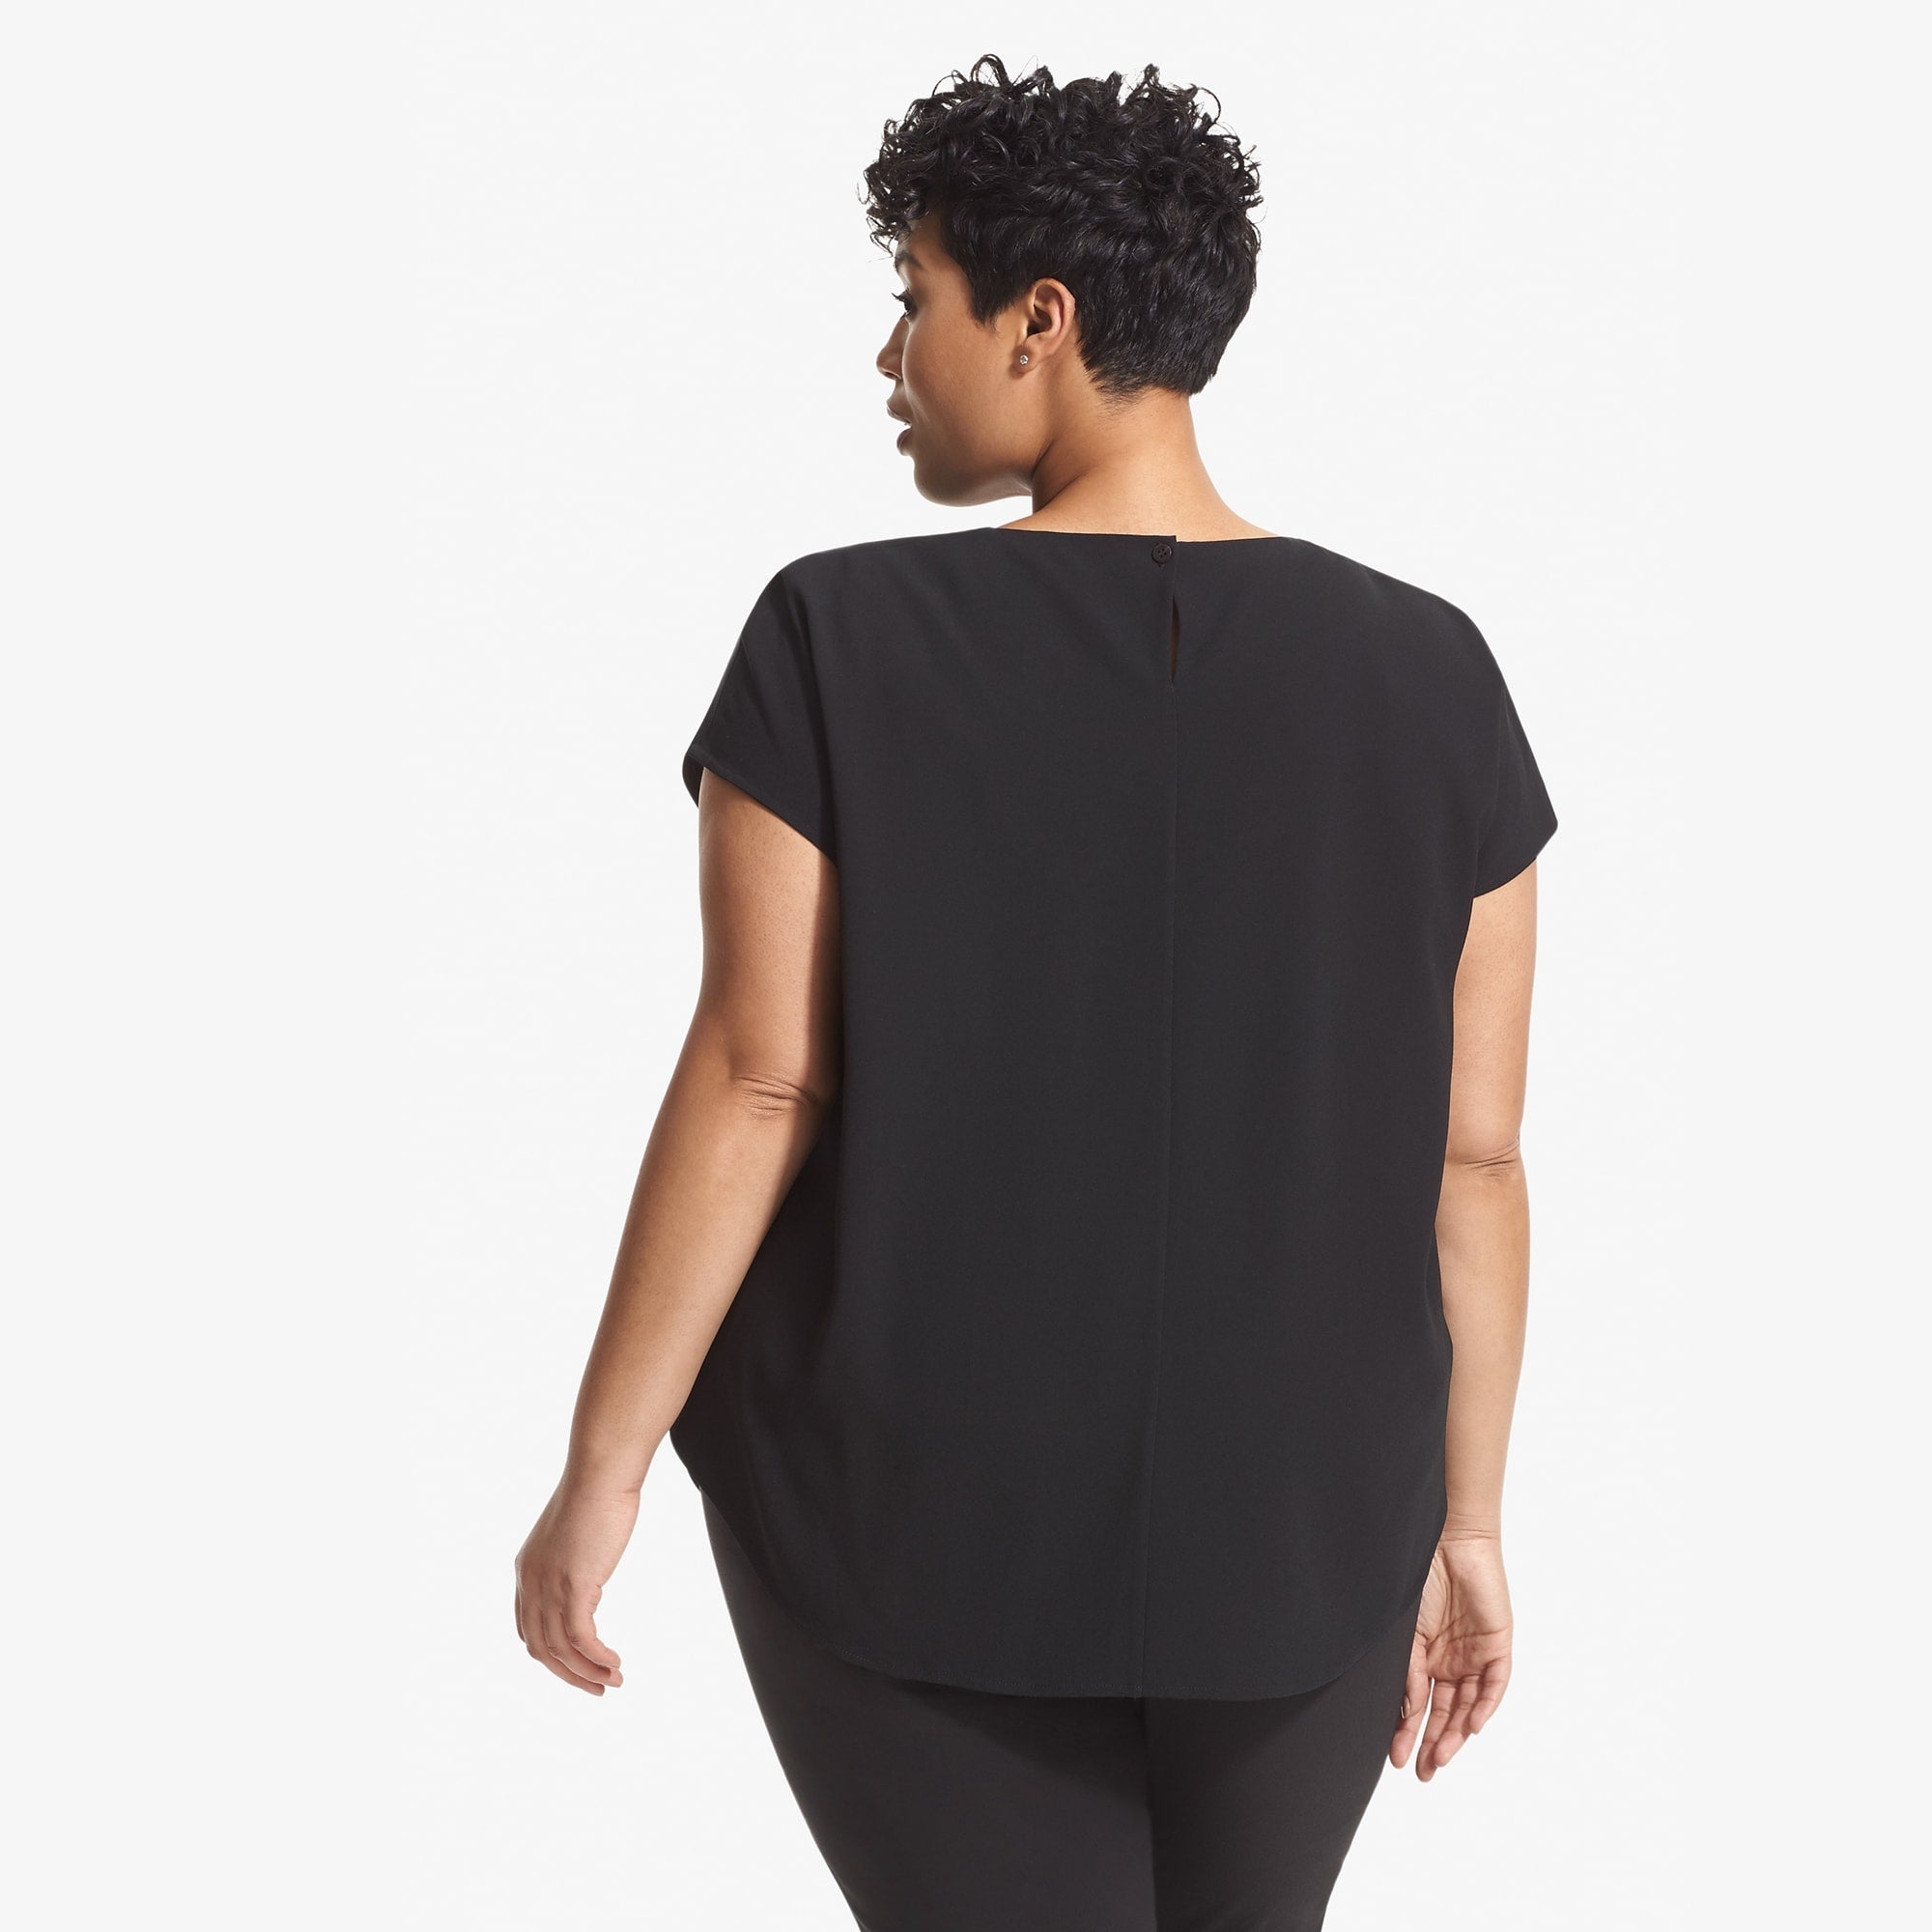 Back image of a woman standing wearing the Didion top in black